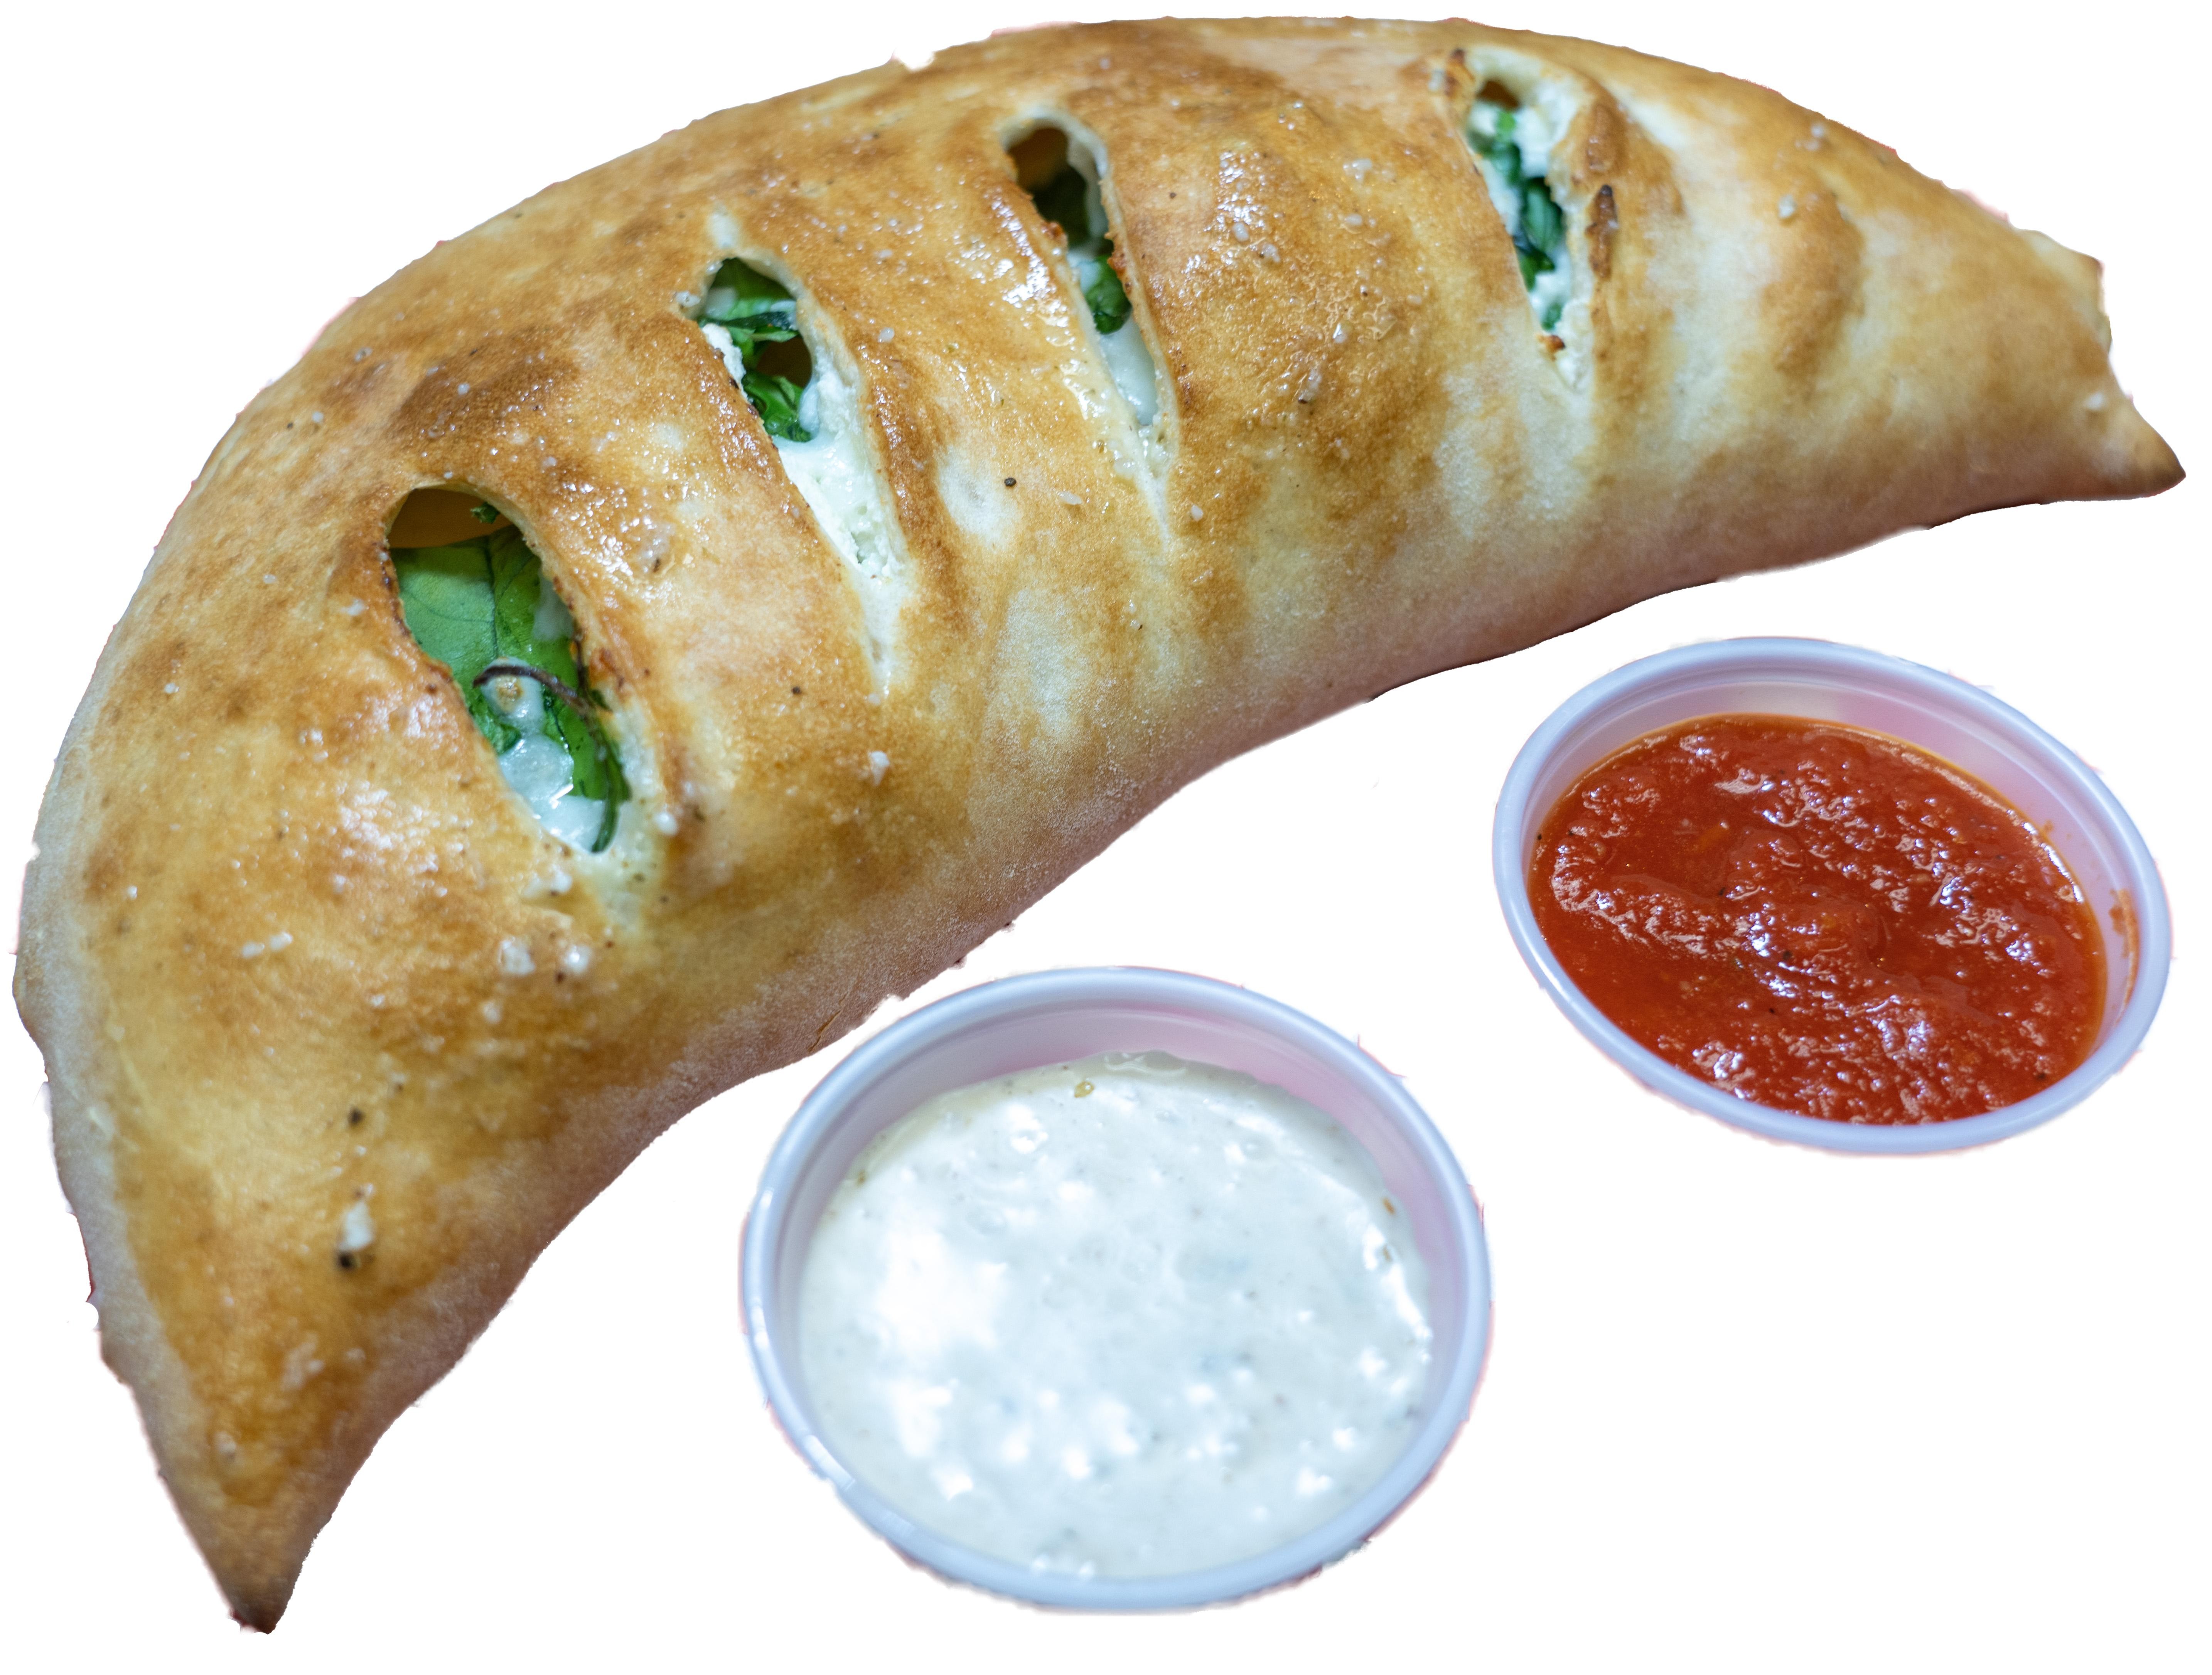 Four cheese calzones